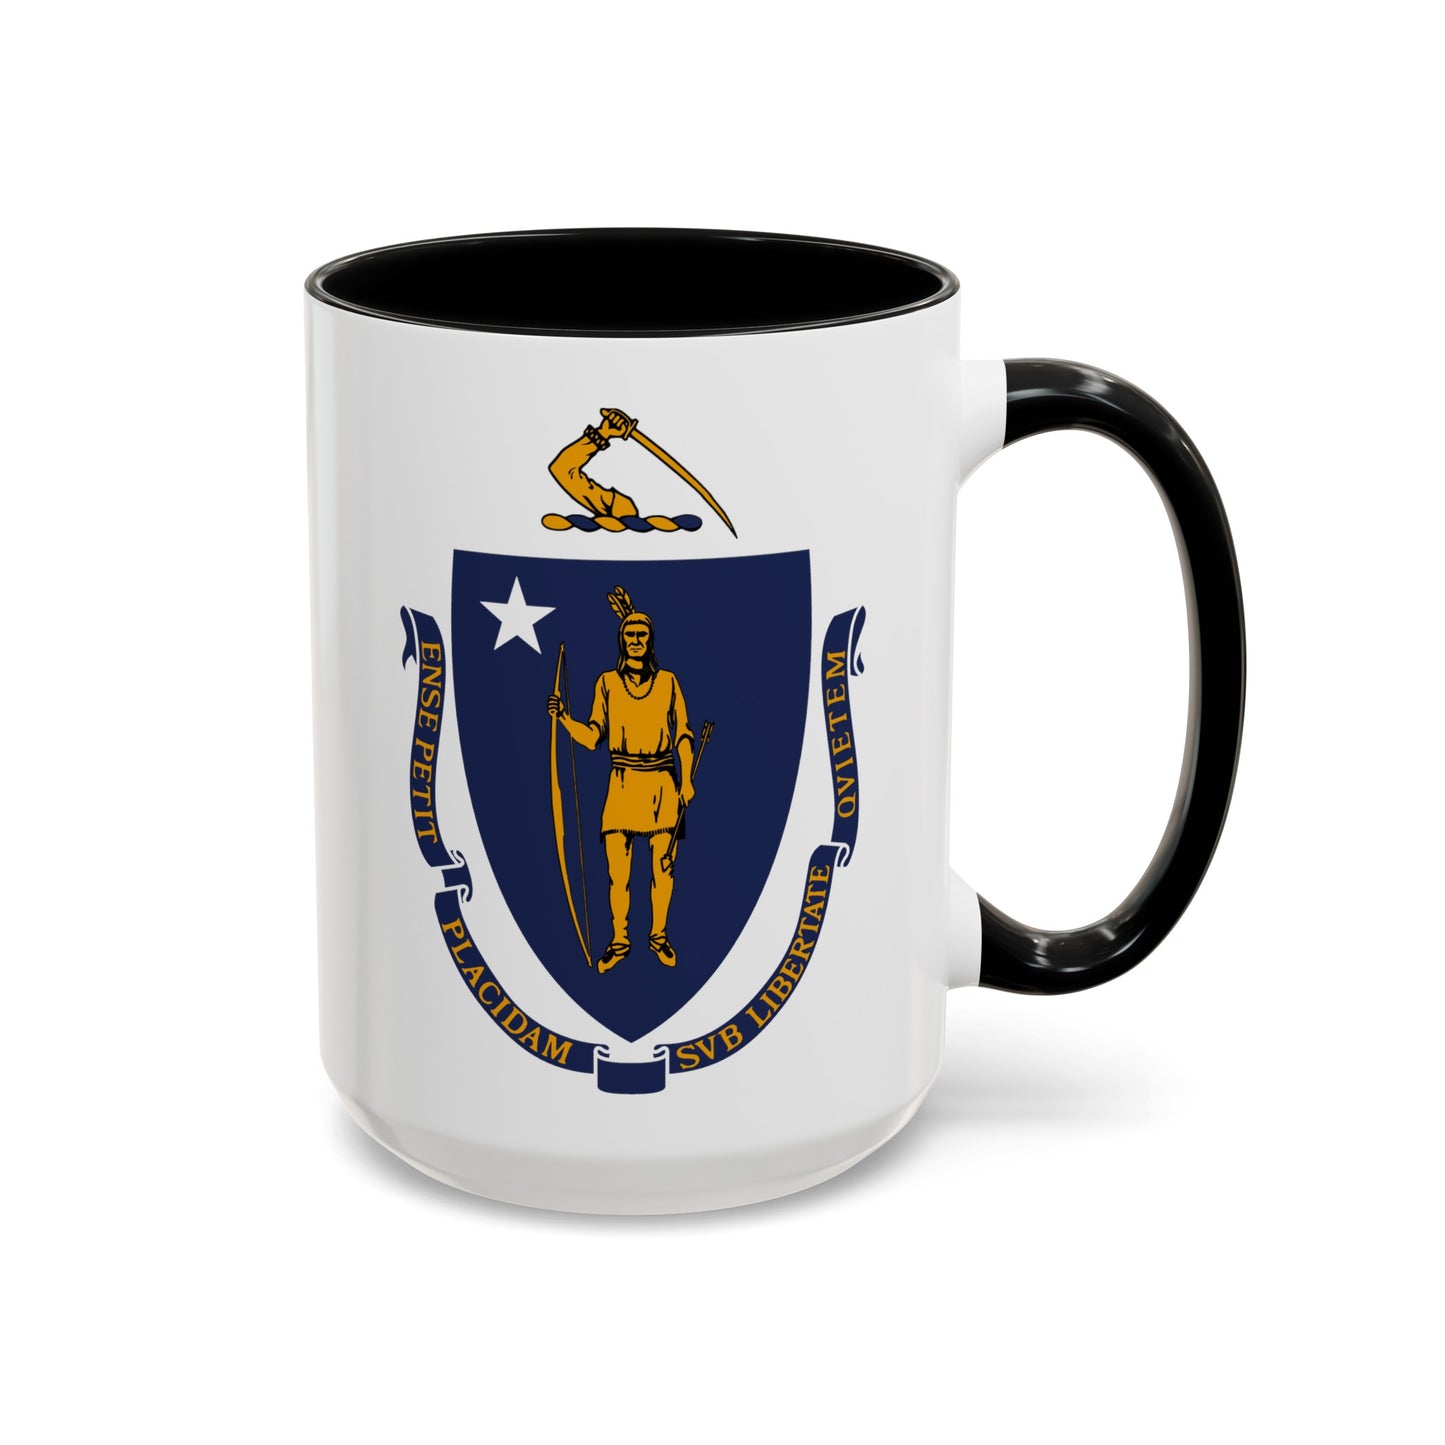 Commonwealth of Massachusetts State Flag - Double Sided Black Accent White Ceramic Coffee Mug 15oz by TheGlassyLass.com